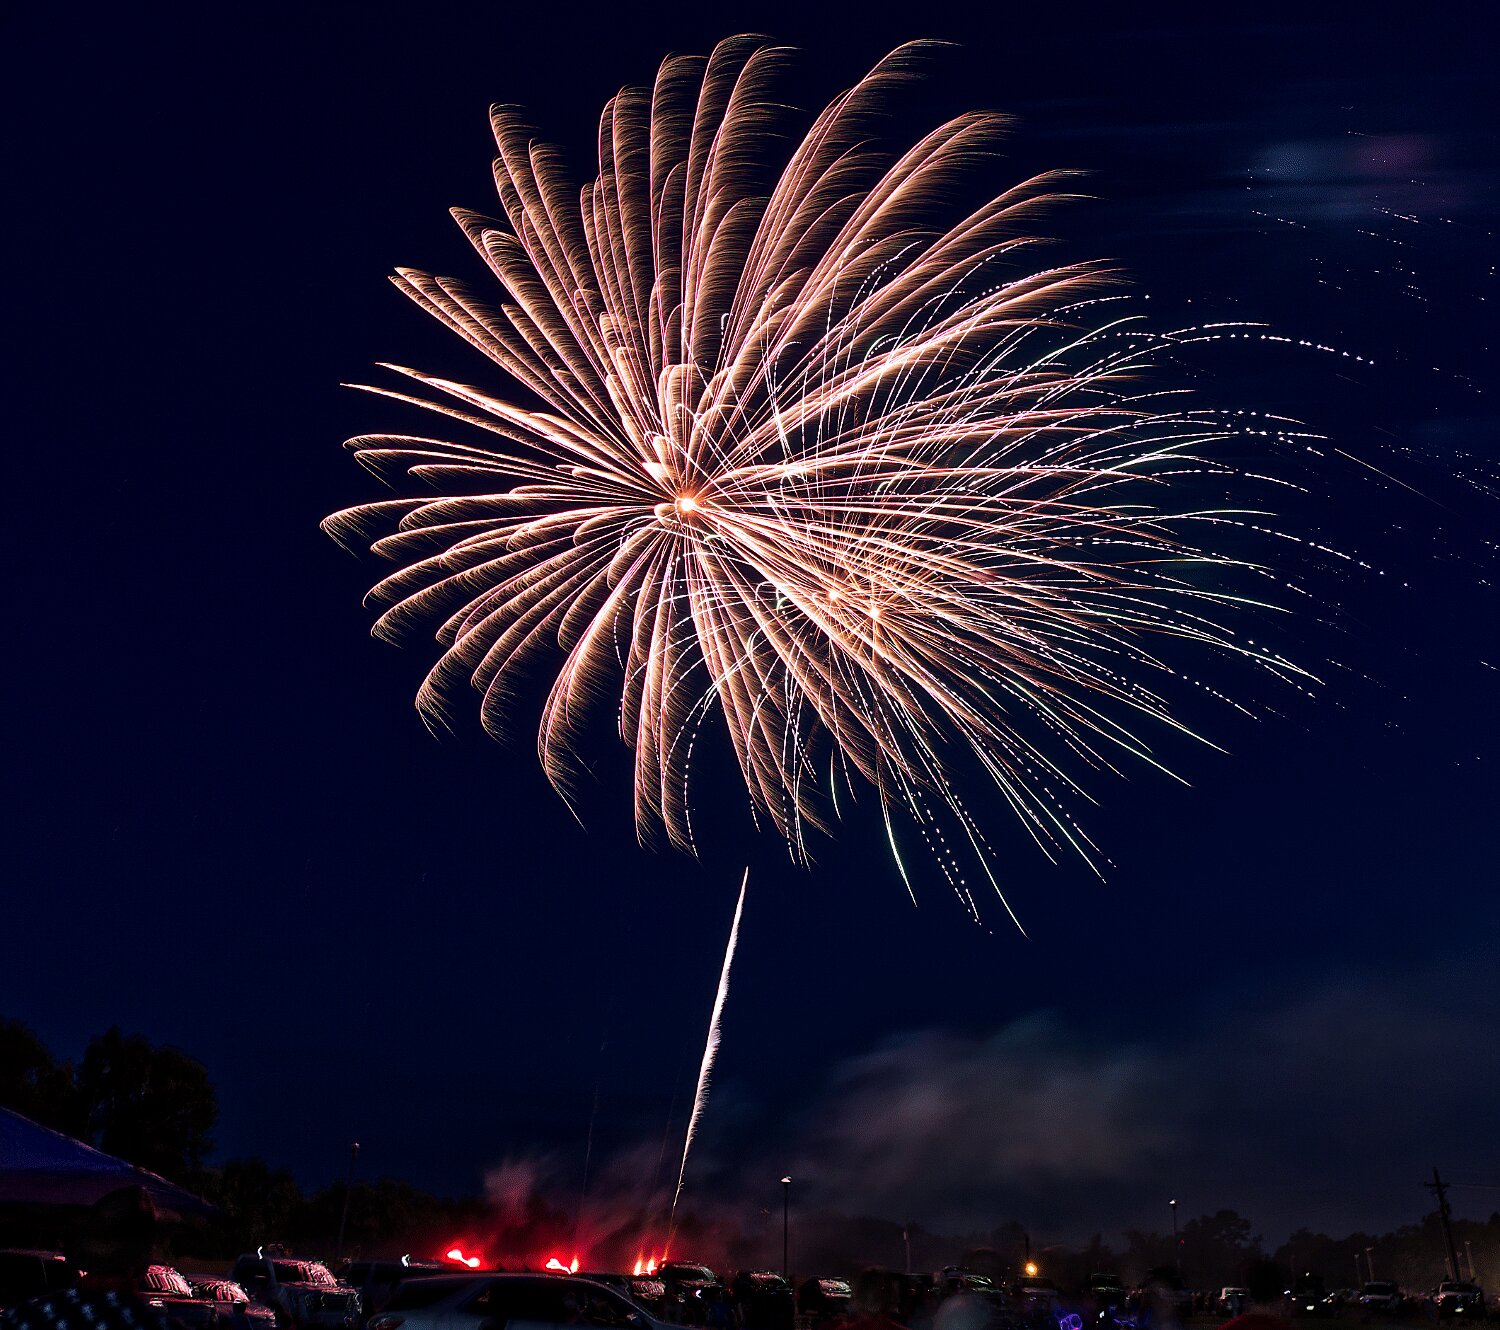 The annual fireworks show put on by the Mineola Fire Dept. began as the Lake Country Symphonic band played the last strain of "The Stars and Stripes Forever" by John Philip Sousa. [peep plenty more patriotic photos]